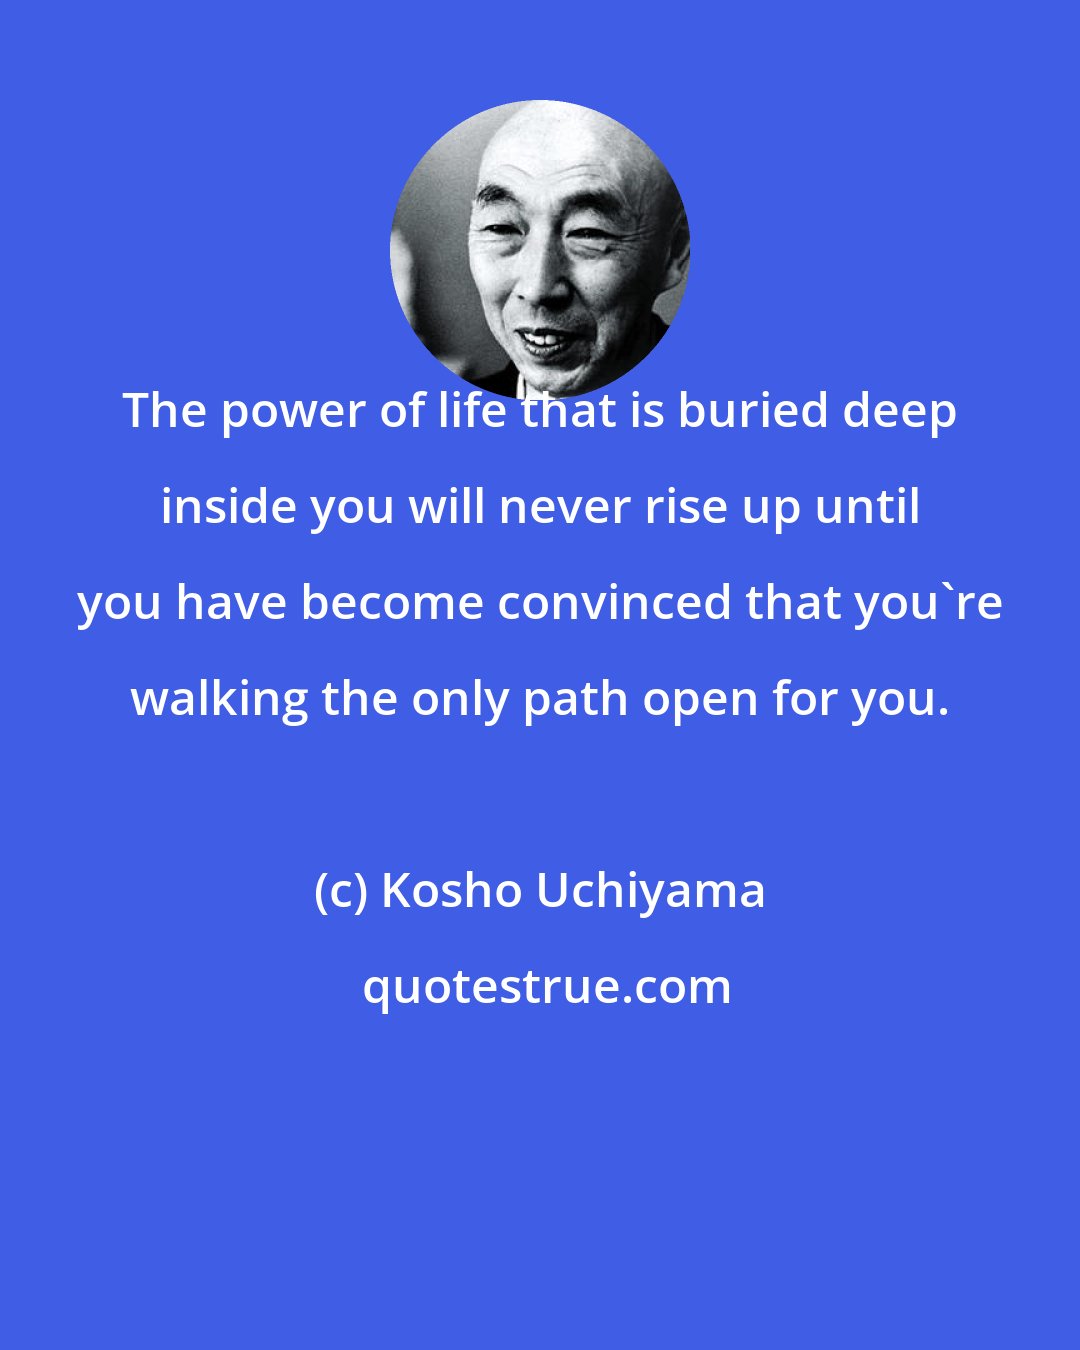 Kosho Uchiyama: The power of life that is buried deep inside you will never rise up until you have become convinced that you're walking the only path open for you.